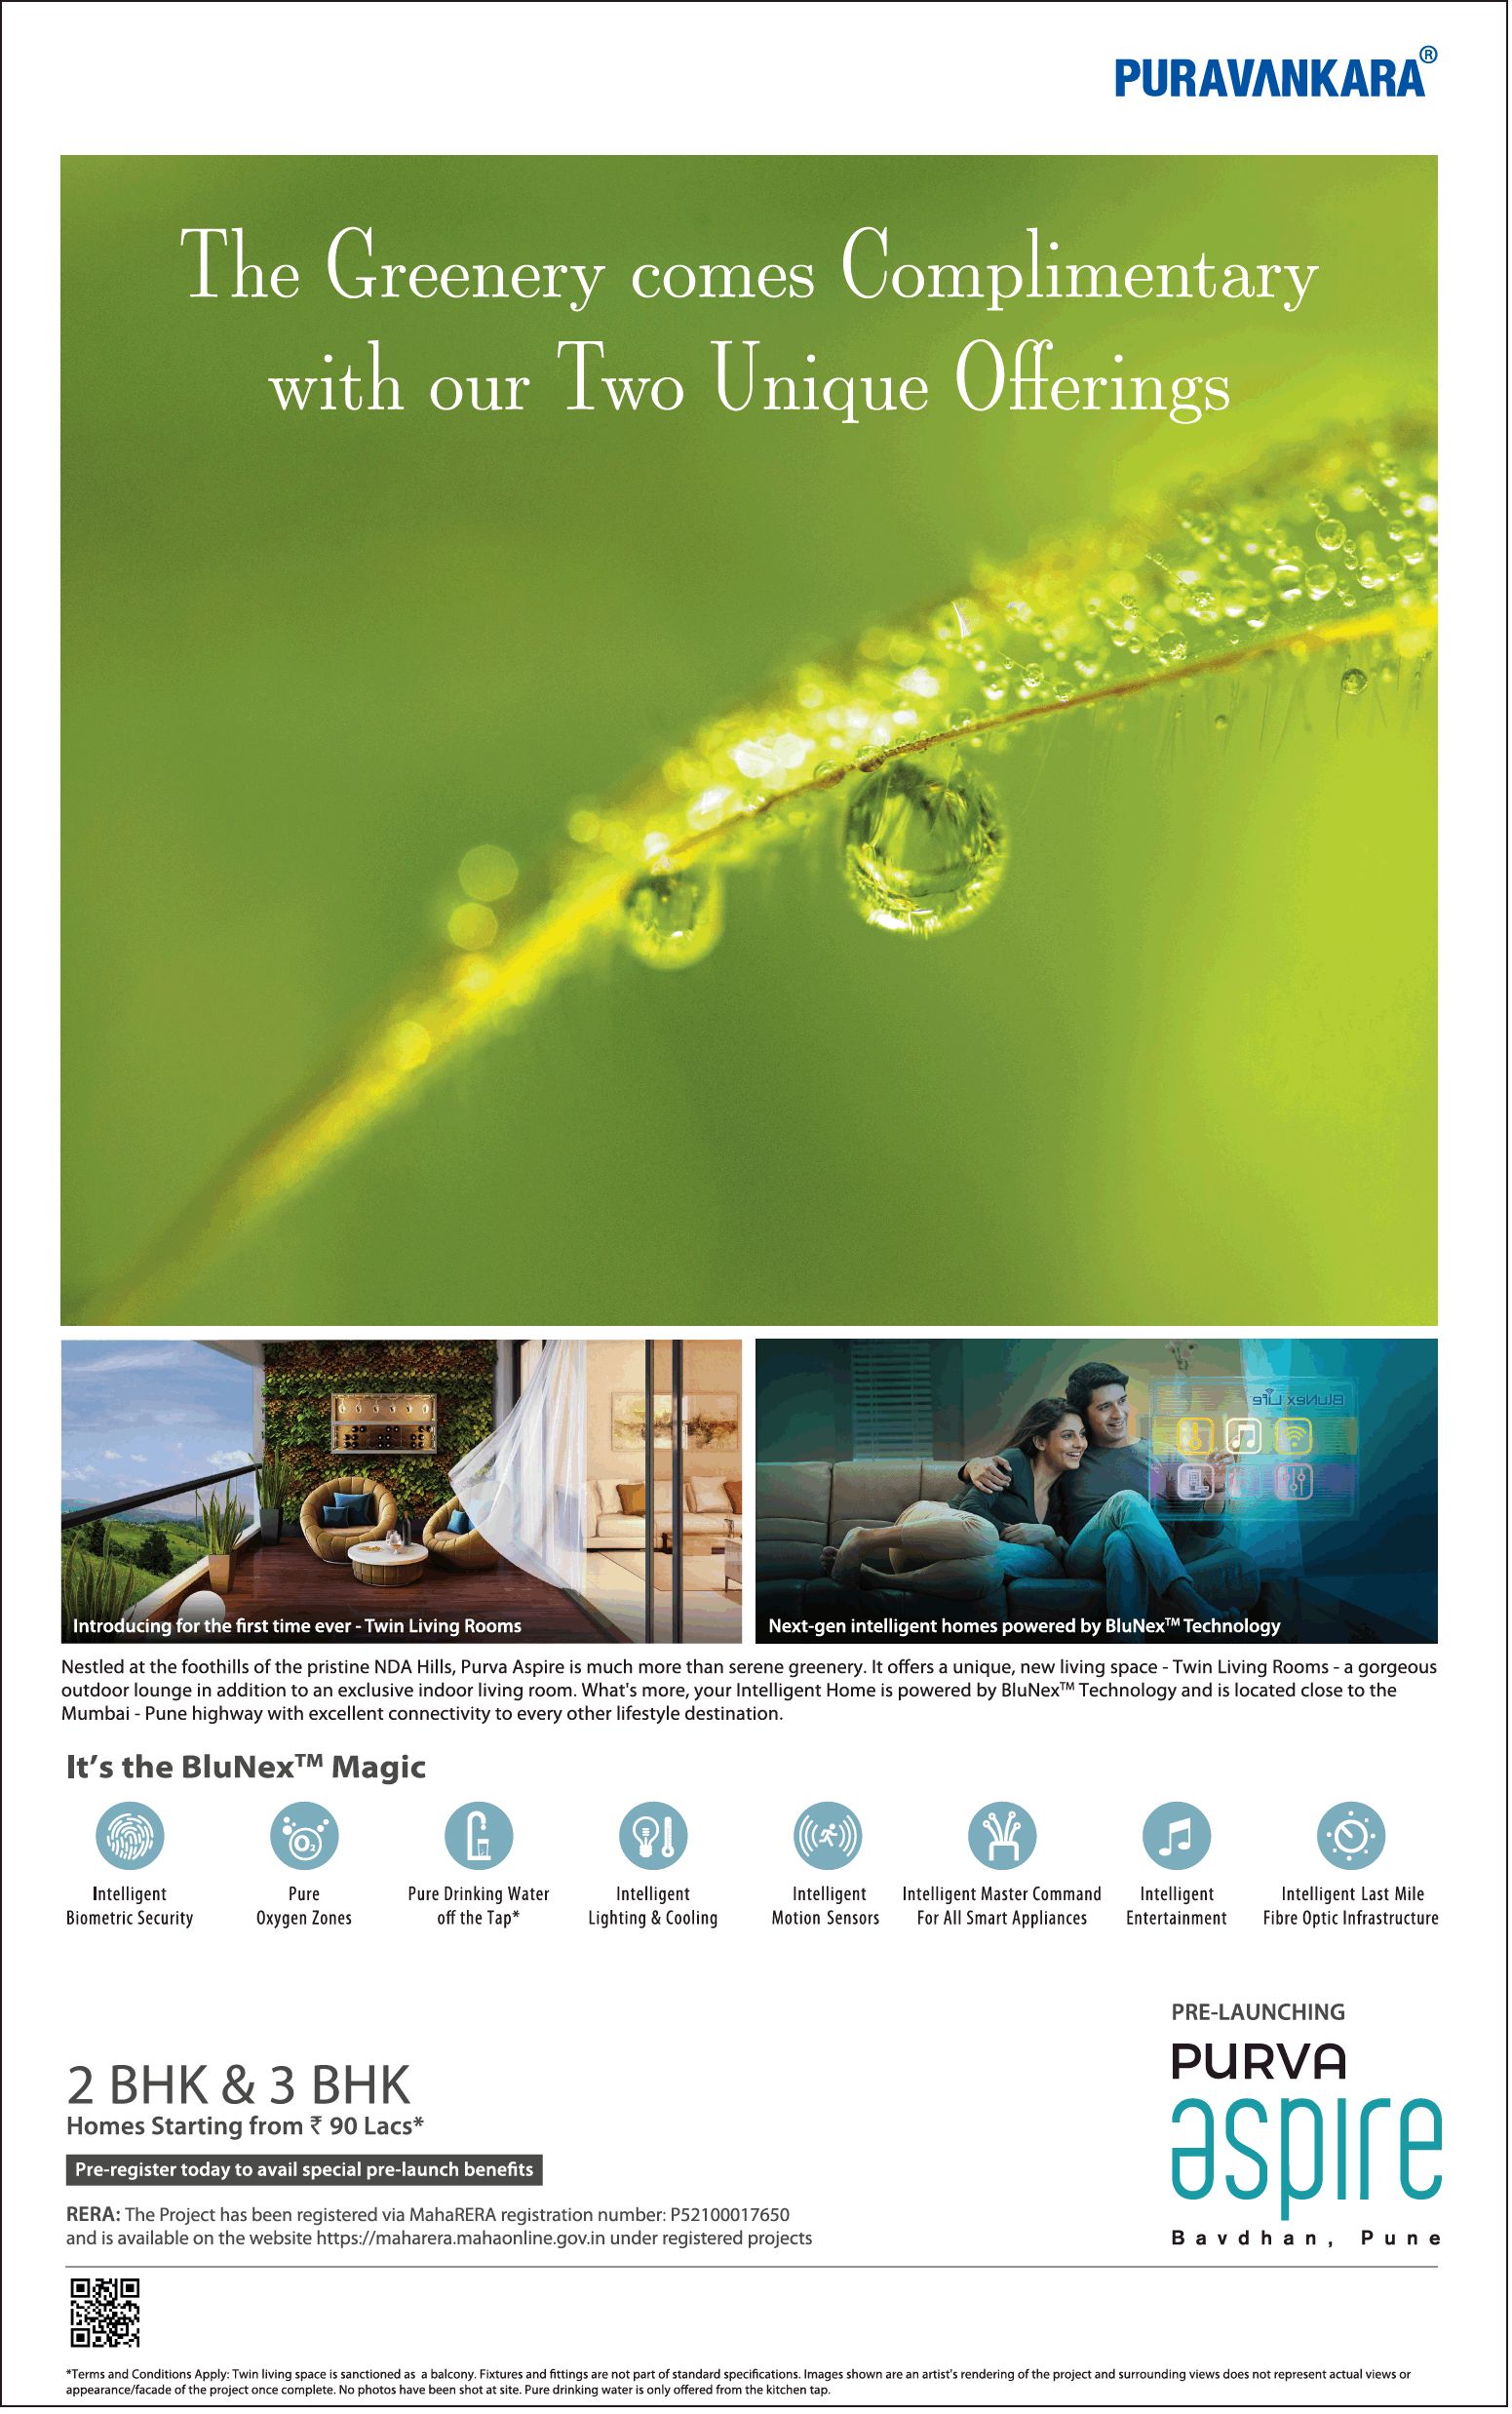 The greenery comes complimentary with our two unique offerings at Purva Aspire in Bavdhan, Pune Update